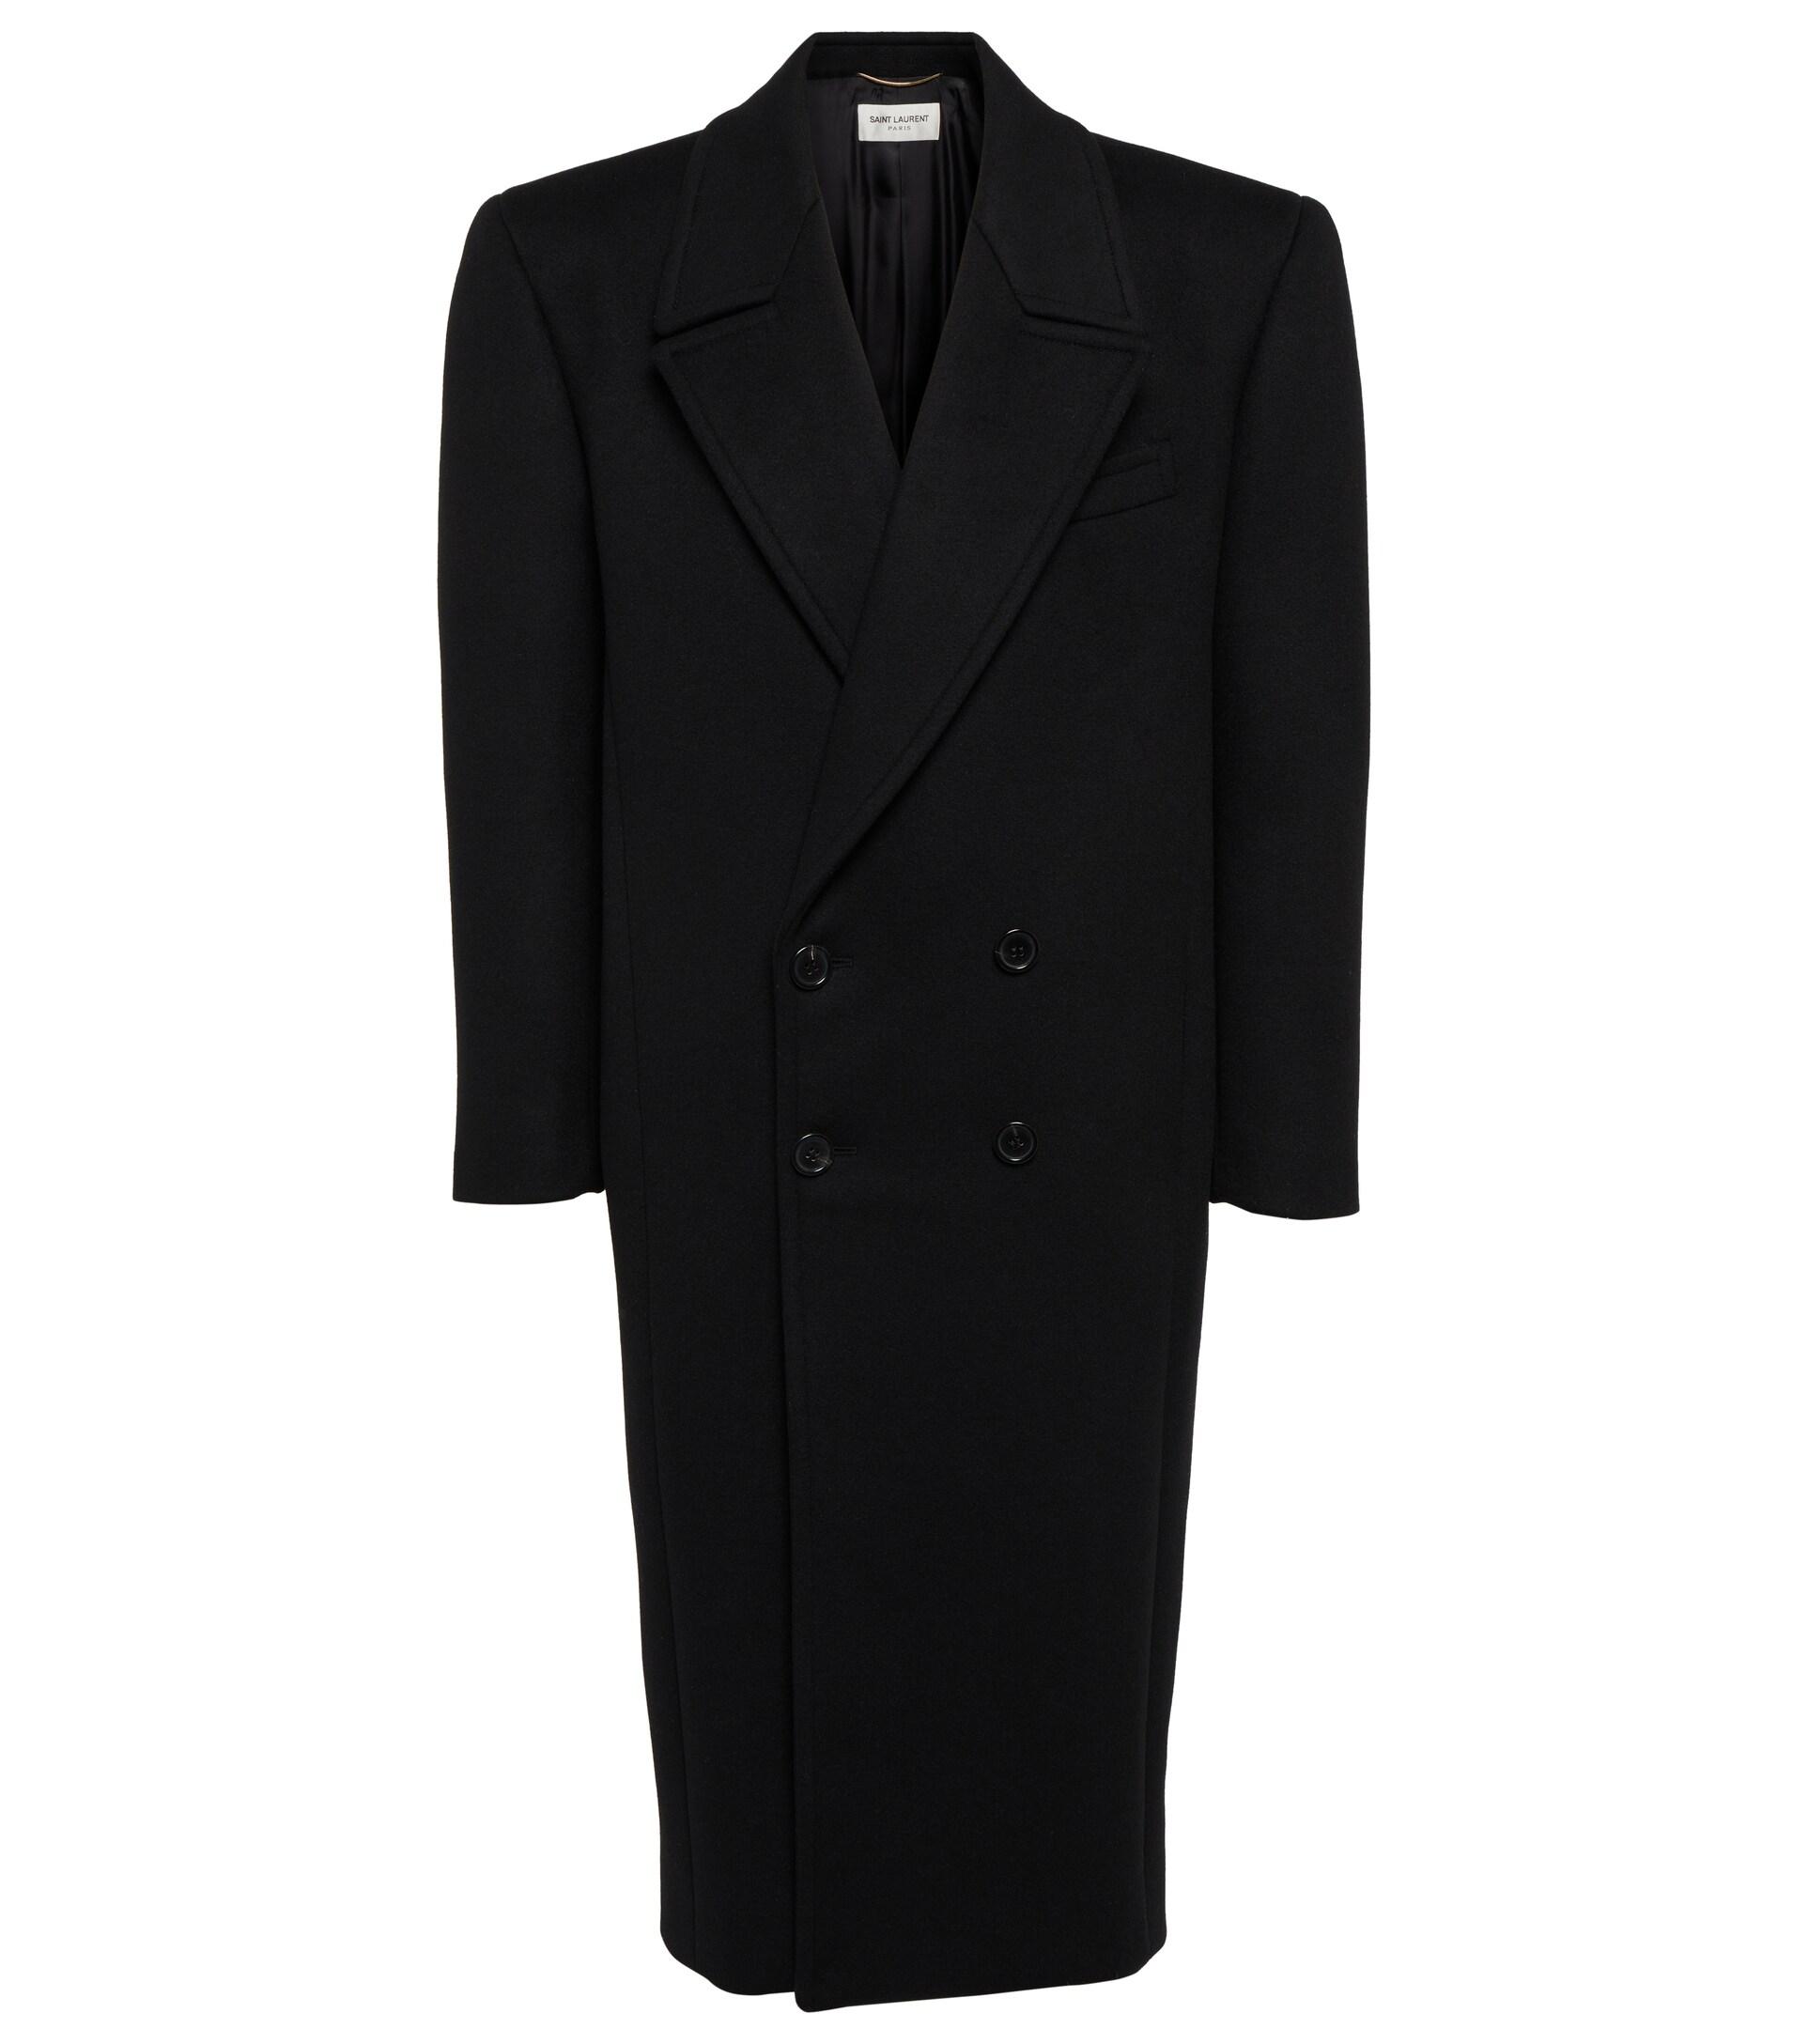 Saint Laurent Double-breasted Cashmere Coat in Black | Lyst